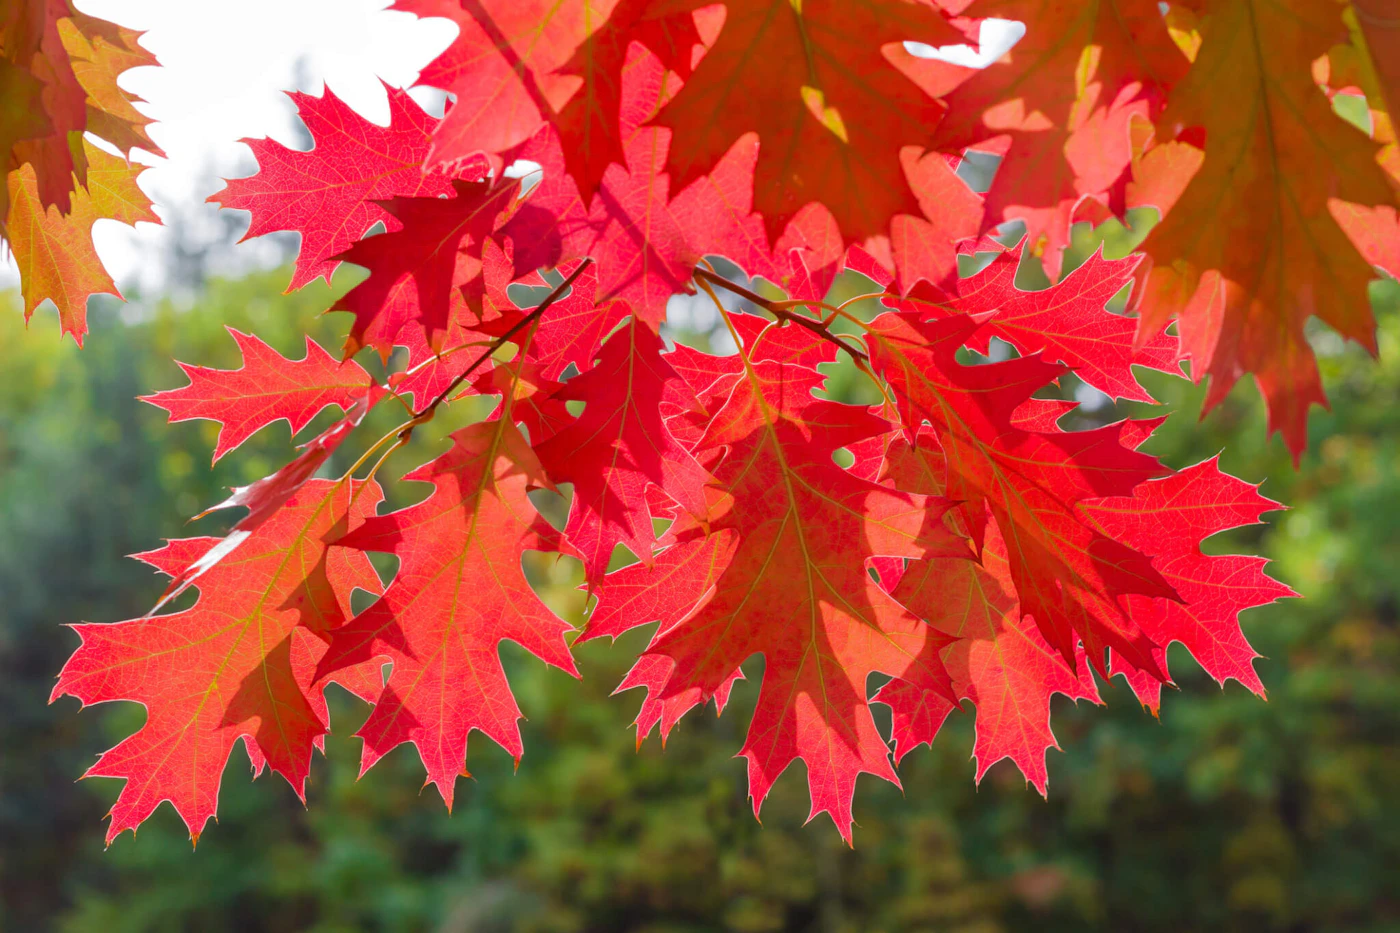 Branches of red oak with red leaves hanging from the top on blurred green background of the forest by iStock / Getty Images